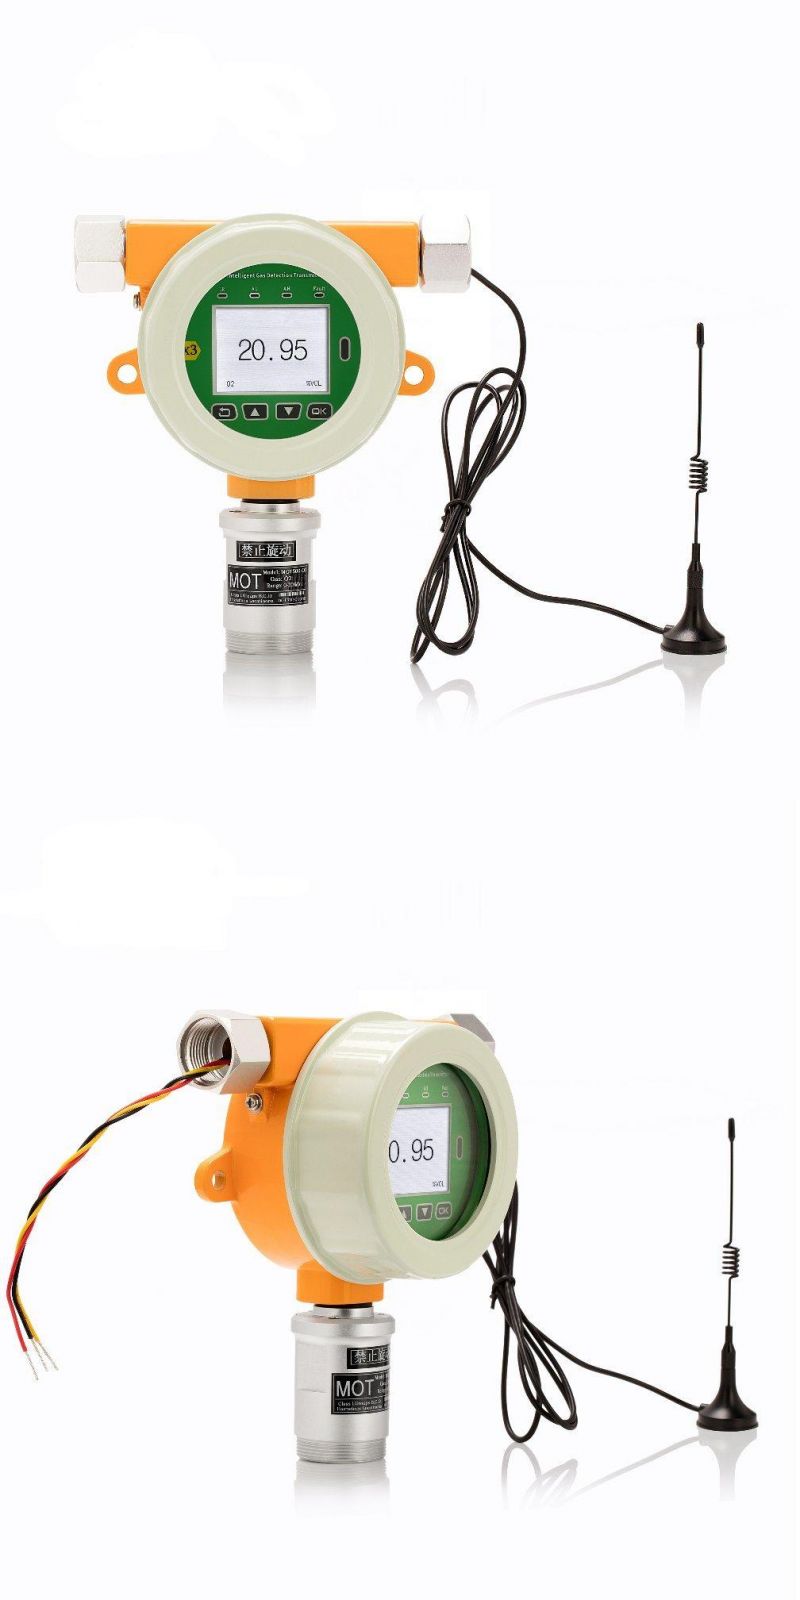 LED Display Wall Mounted Carbonyl Chloride Gas Detector (COCL2)